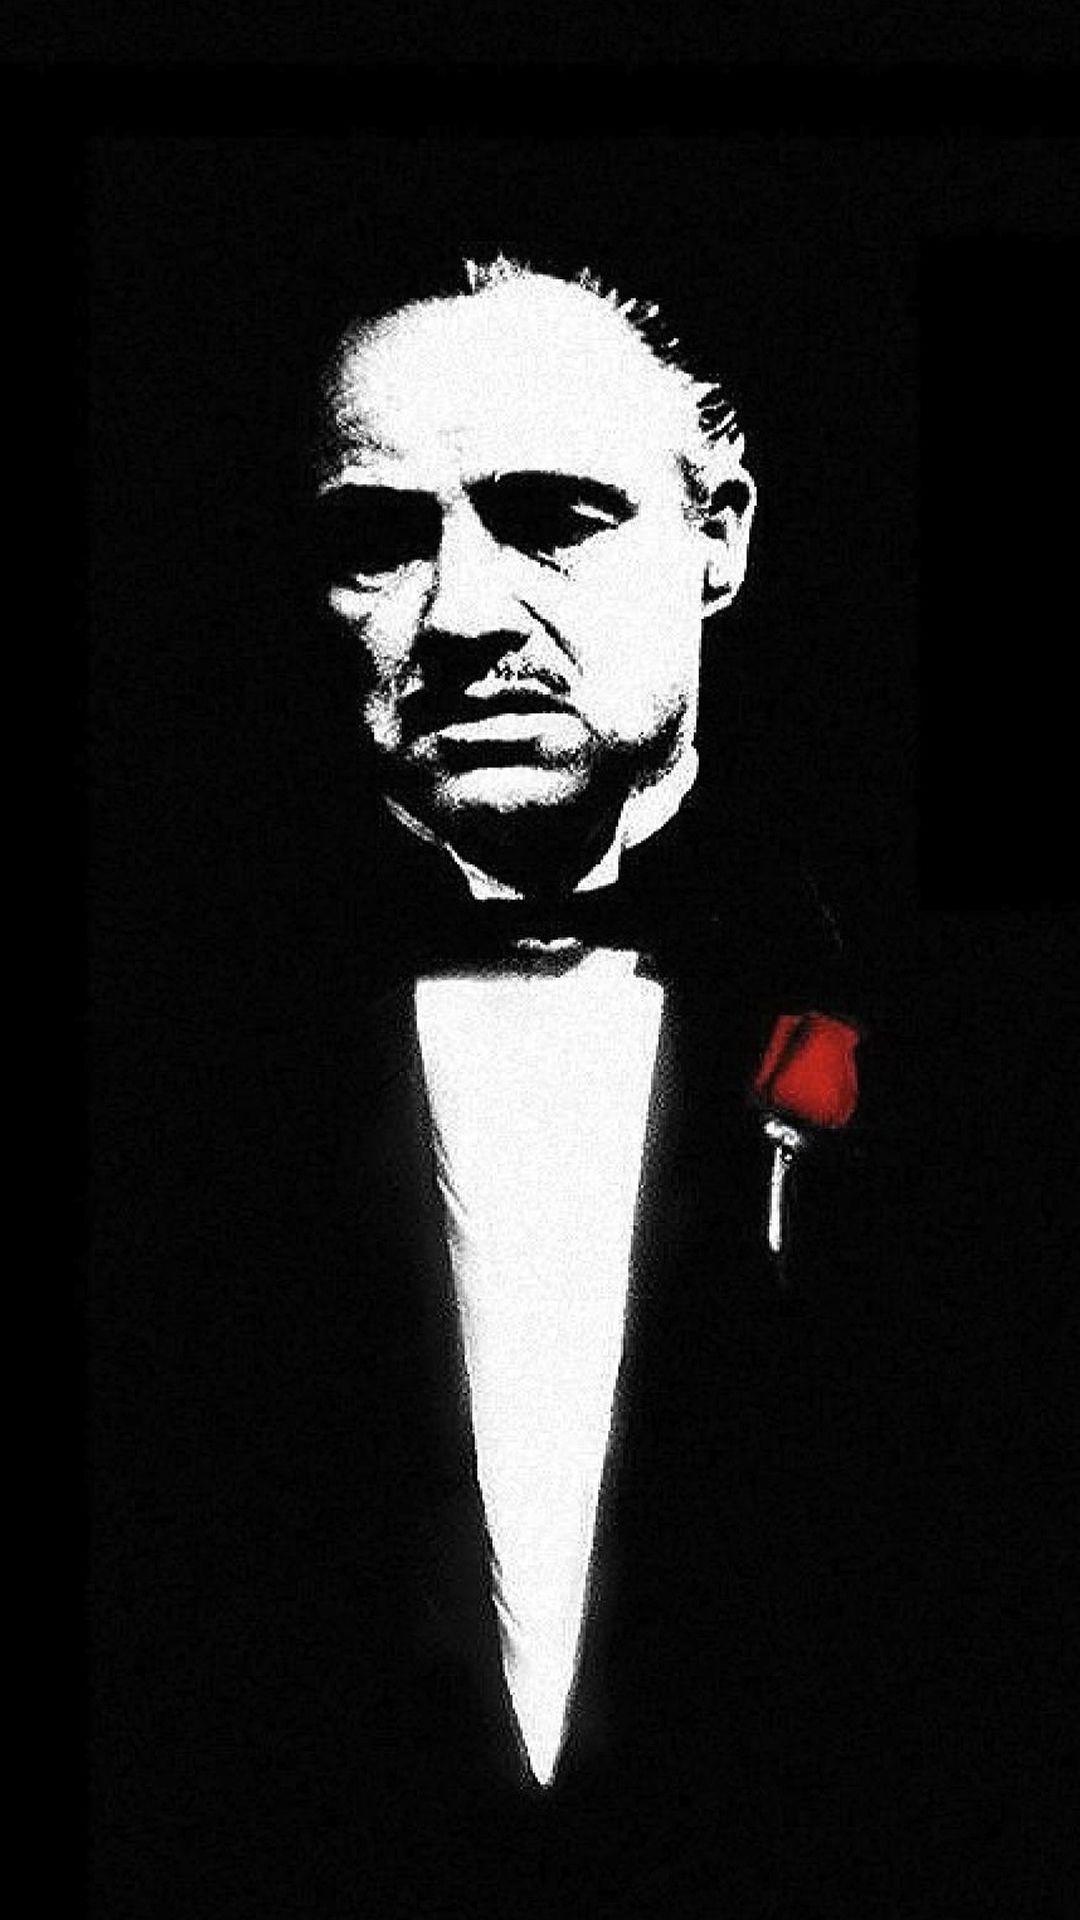 The Godfather #iPhone #wallpaper. iPhone 8 wallpaper